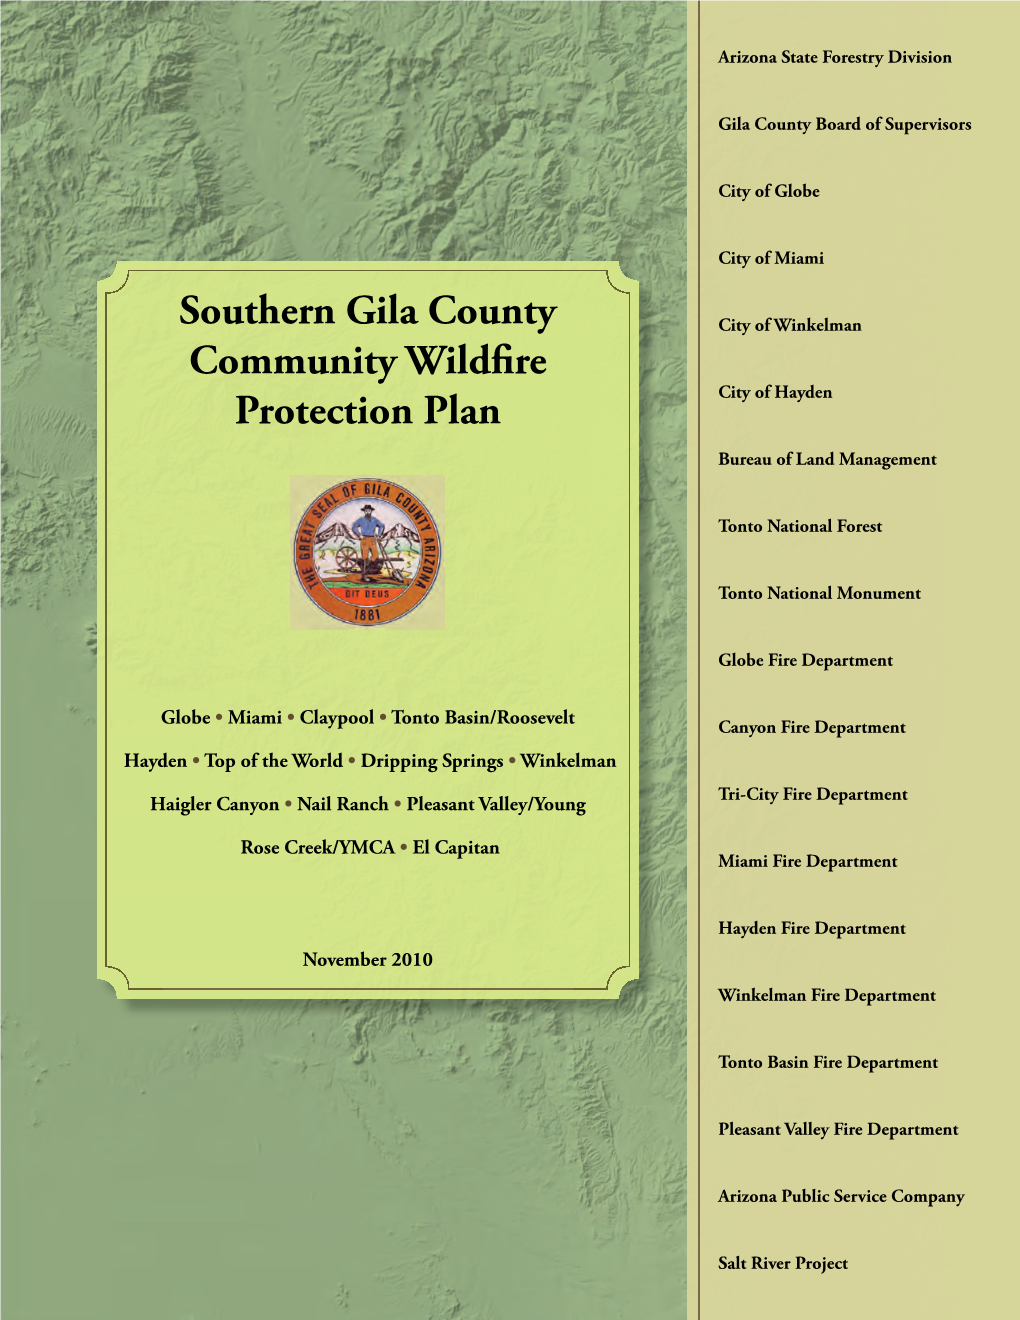 Southern Gila County Community Wildfire Protection Plan